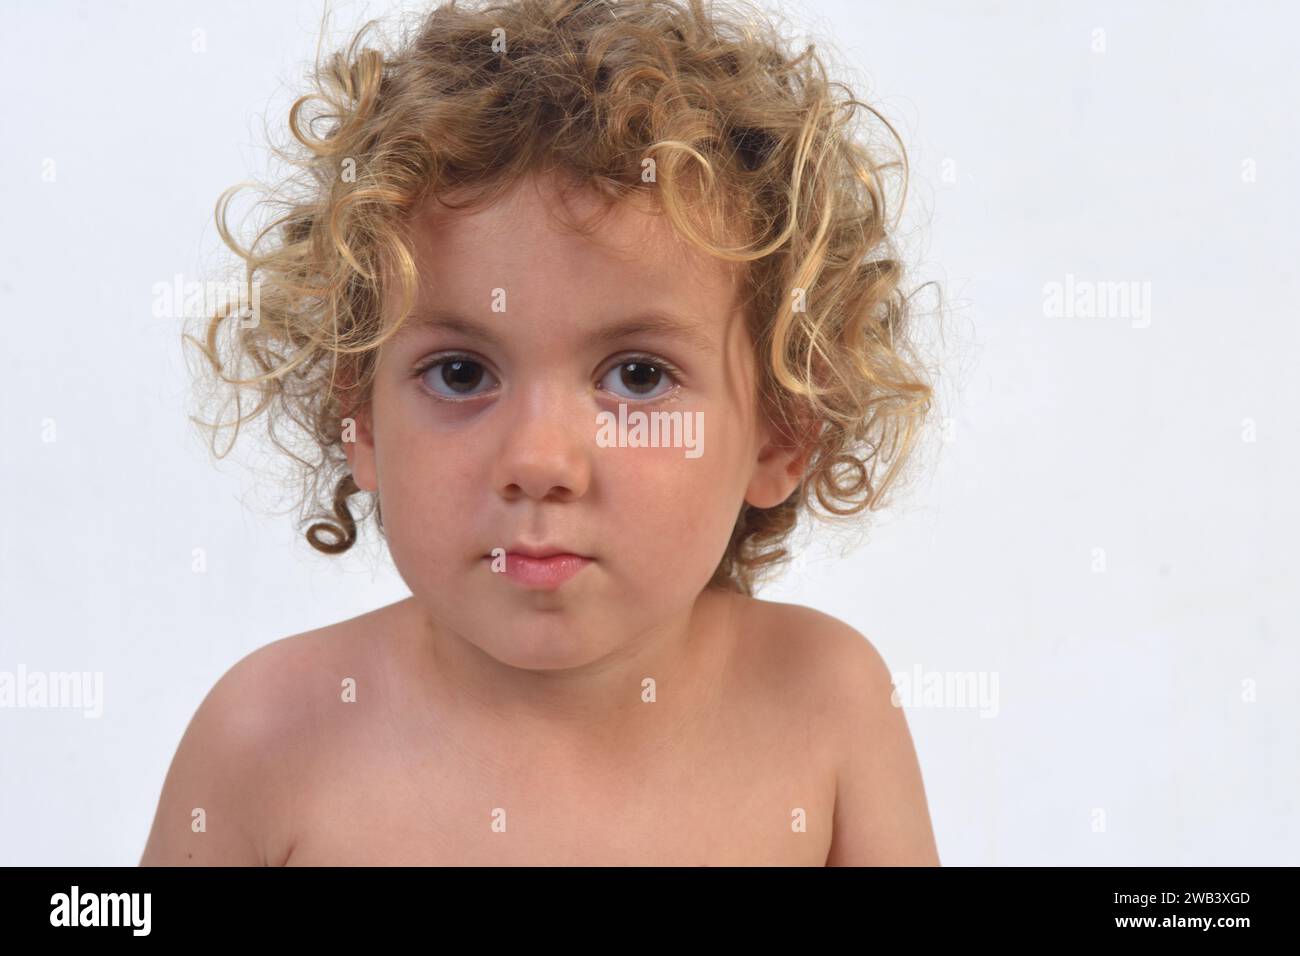 portrait of a boy with a calm expression Stock Photo